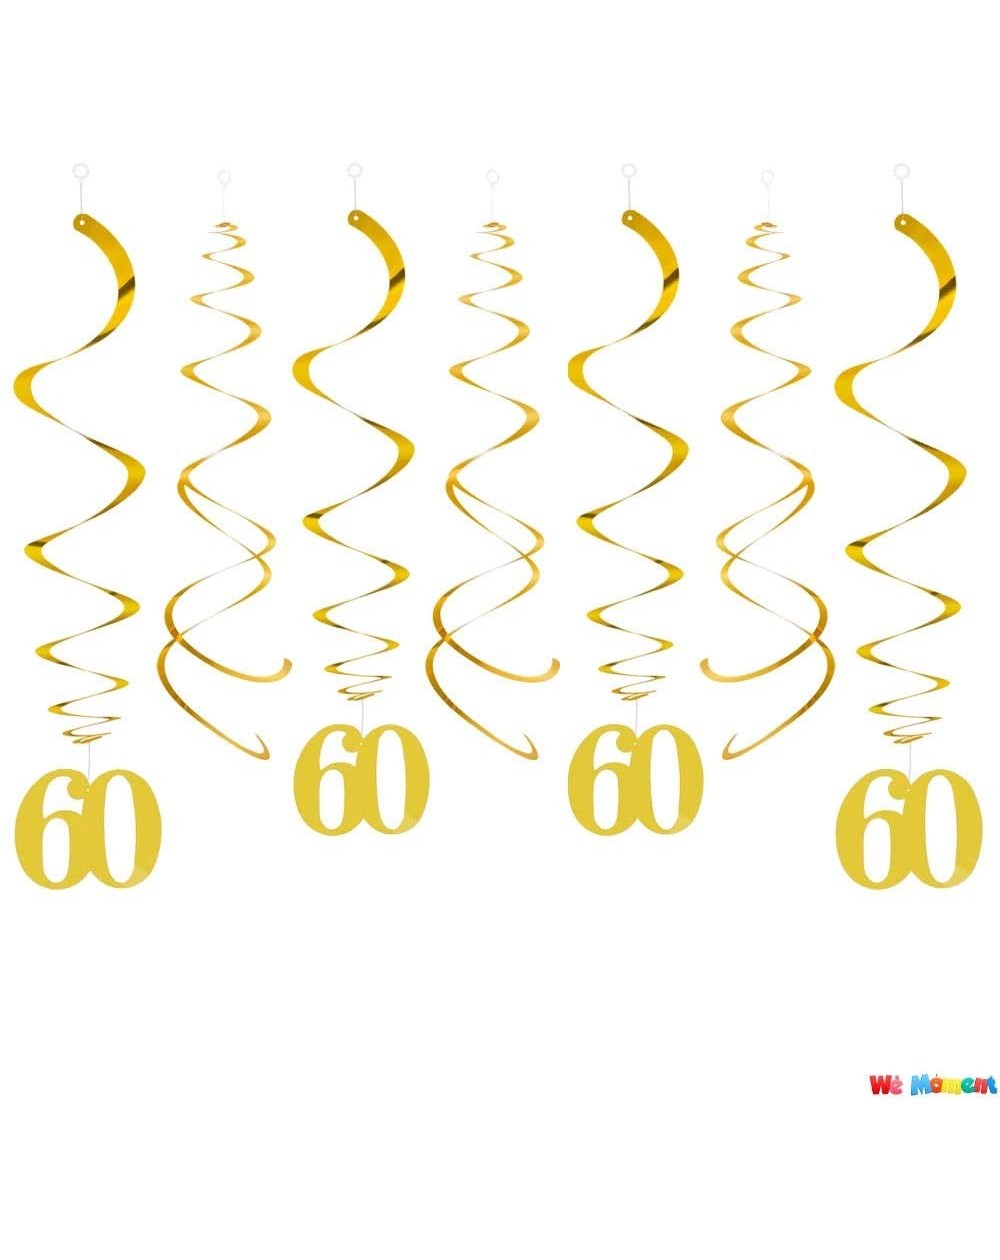 Banners & Garlands Gold 60 Hanging Swirls Number Swirl for 60th Birthday Anniversary Ceiling Decorations-Pack of 20 - Gold-60...